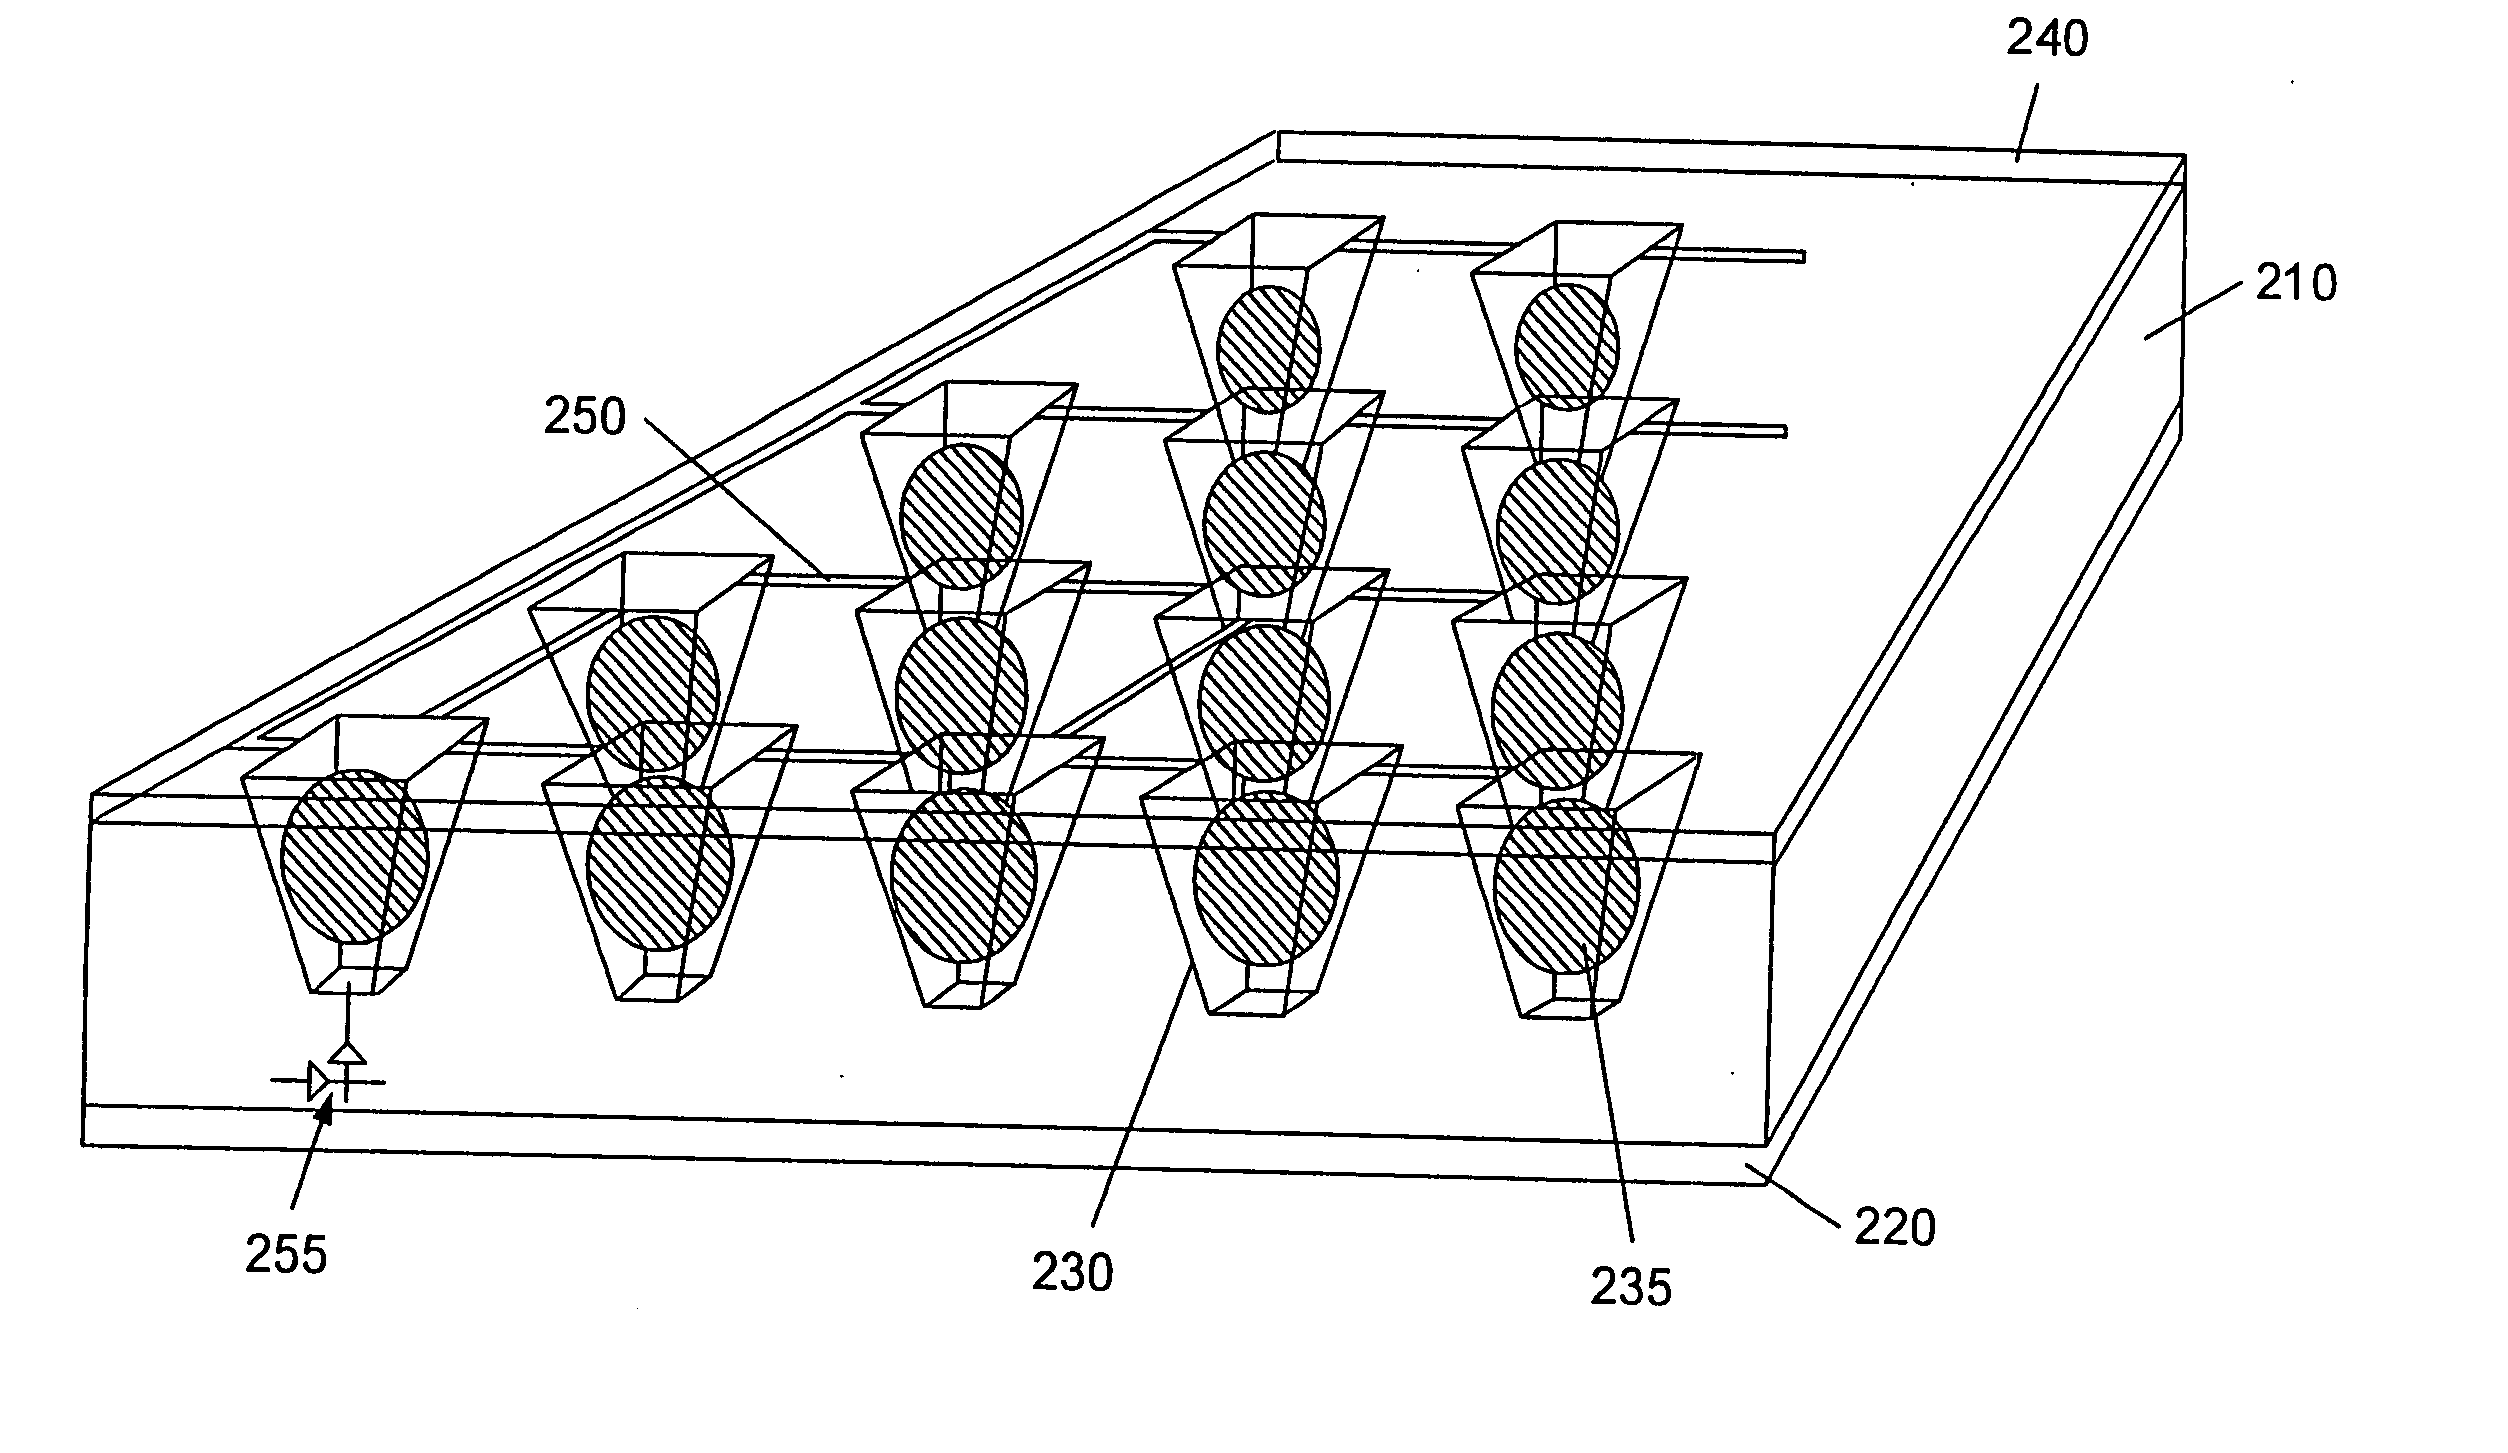 System and method for the analysis of bodily fluids